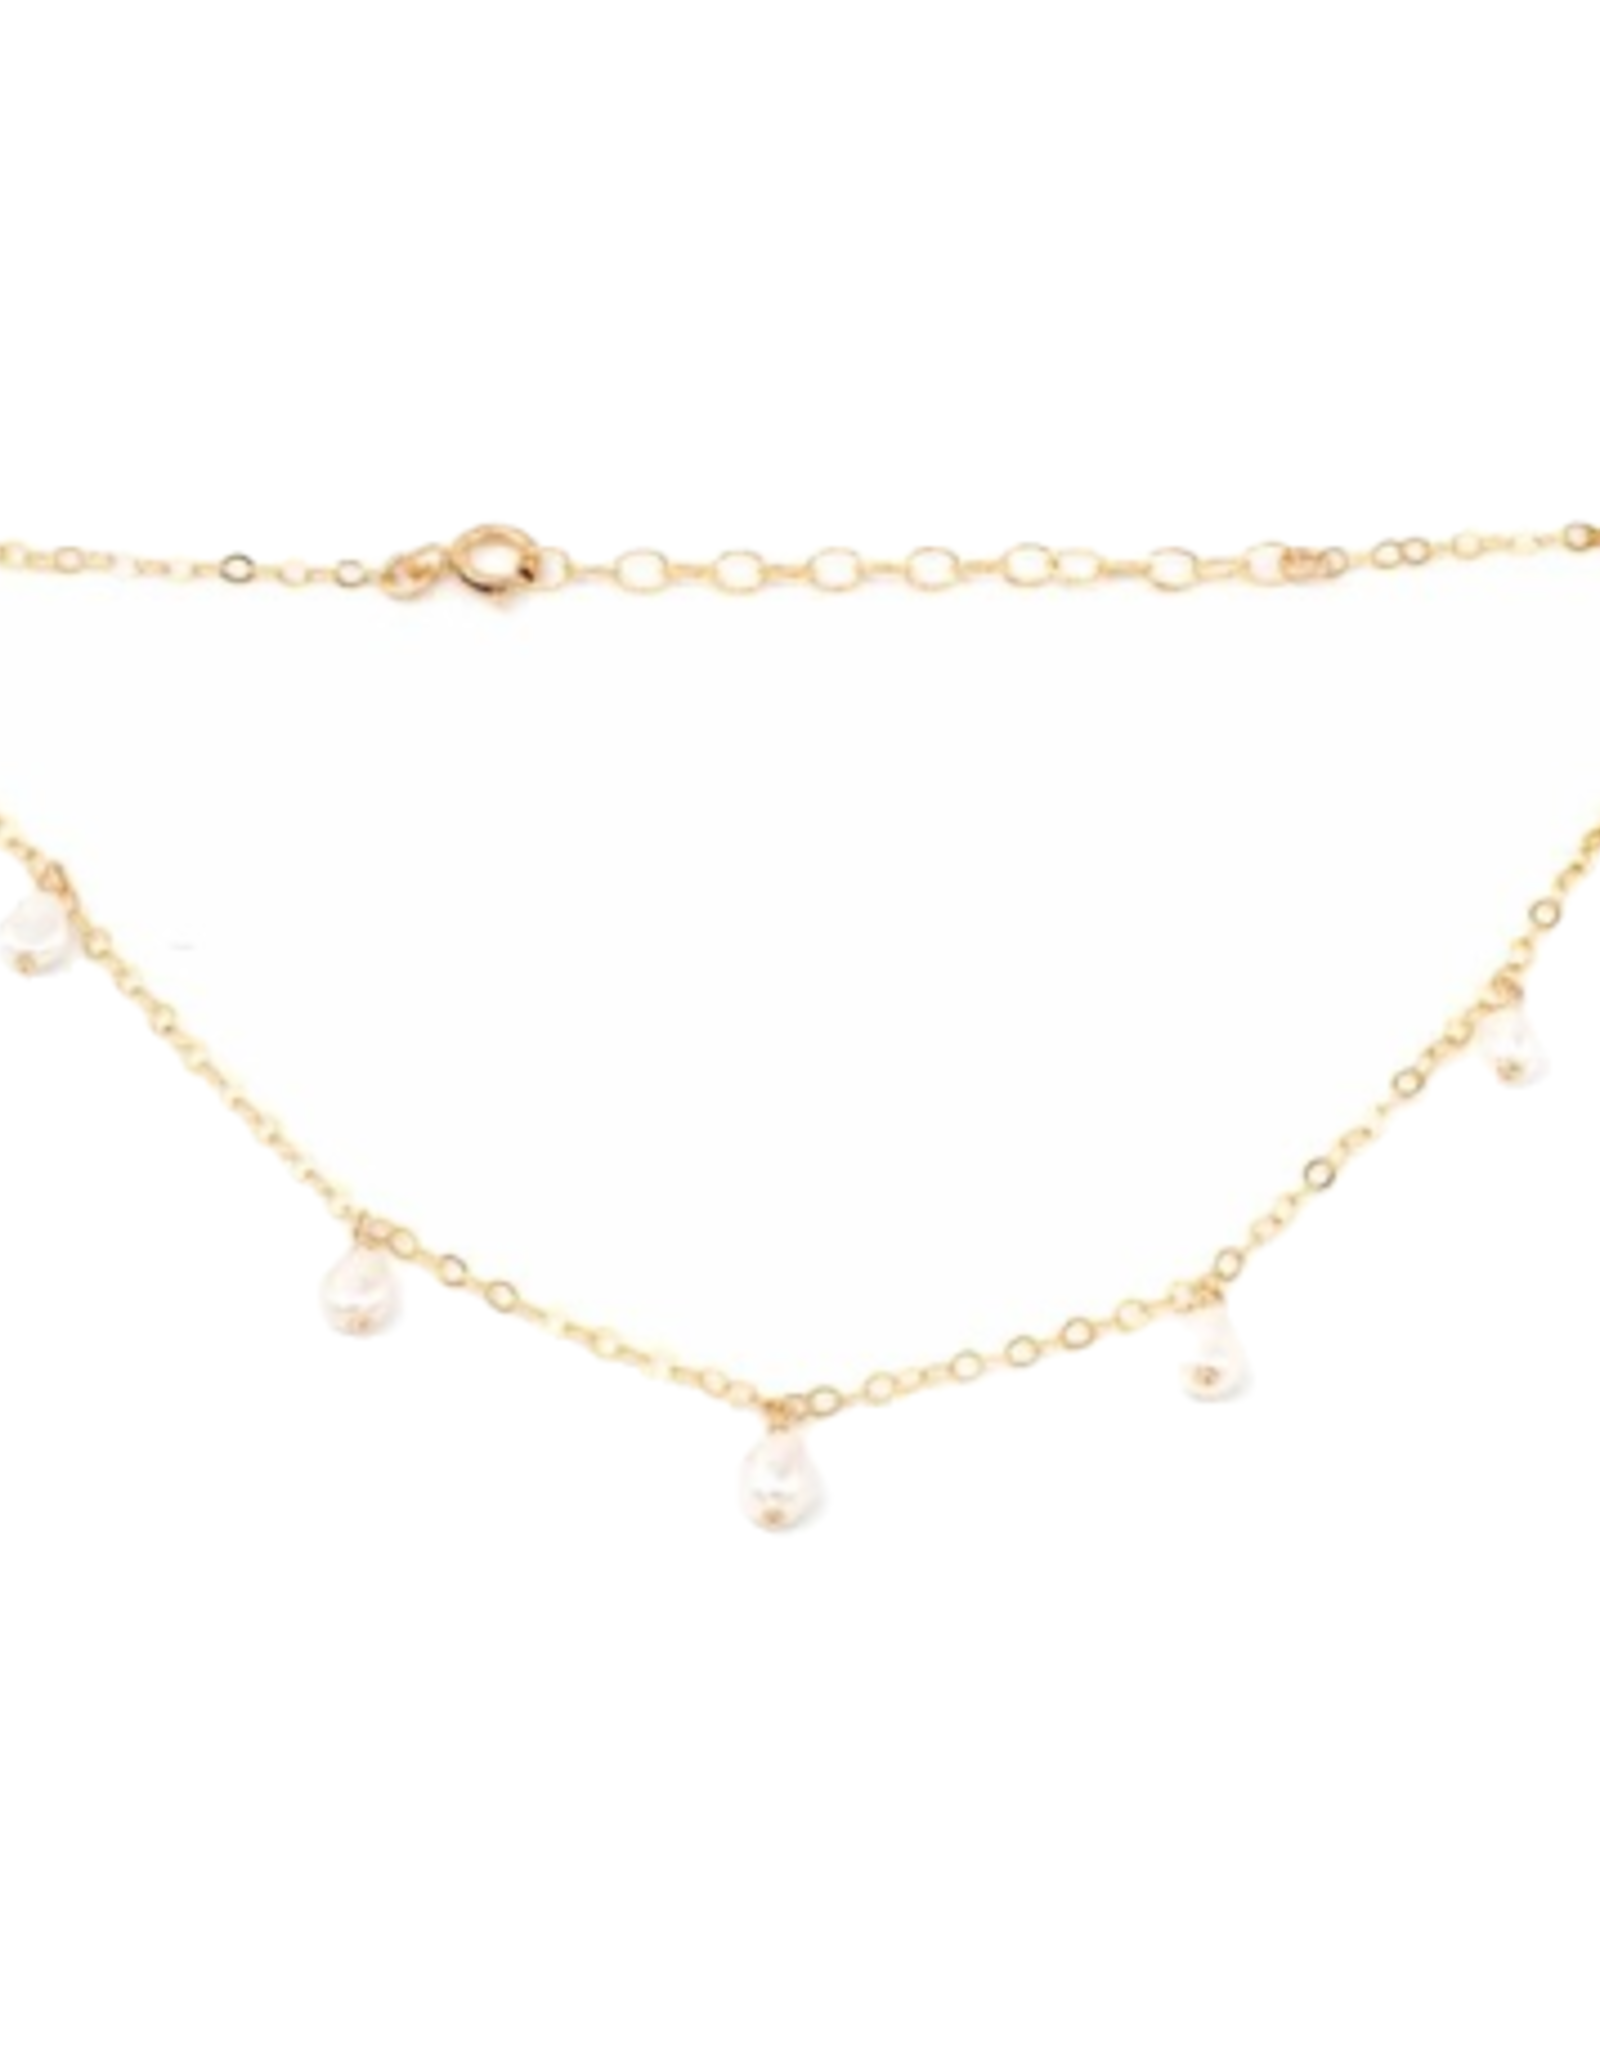 Anklet Tahiti Pearls on Chain Gold Fill